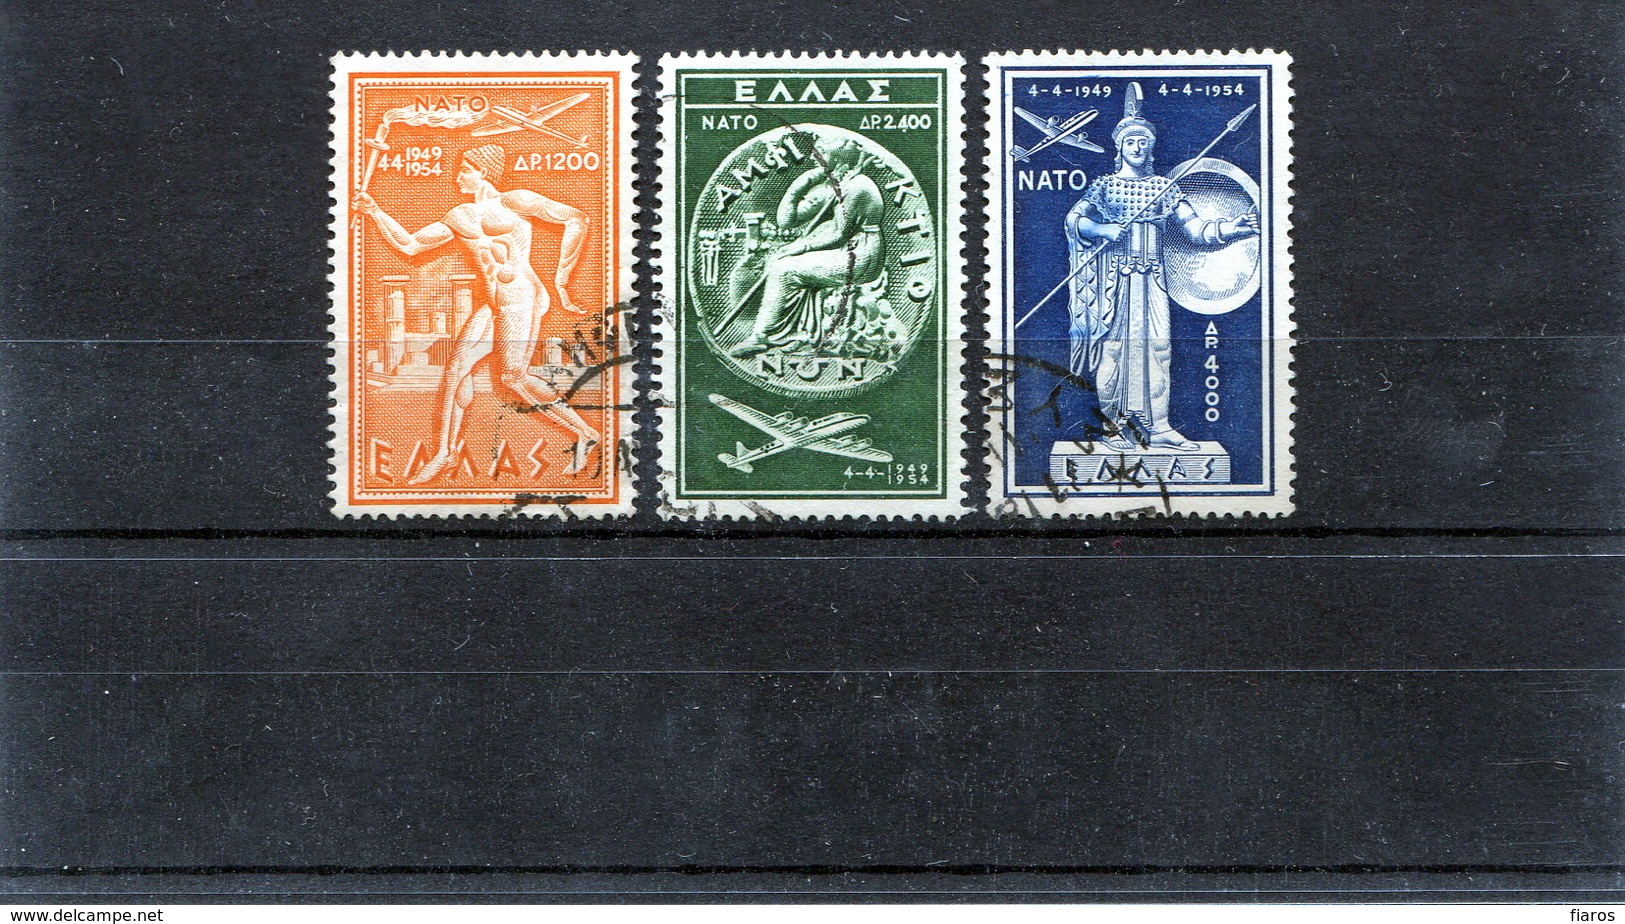 1954-Greece- "N.A.T.O." Airpost Issue- Complete Set Used - Usati